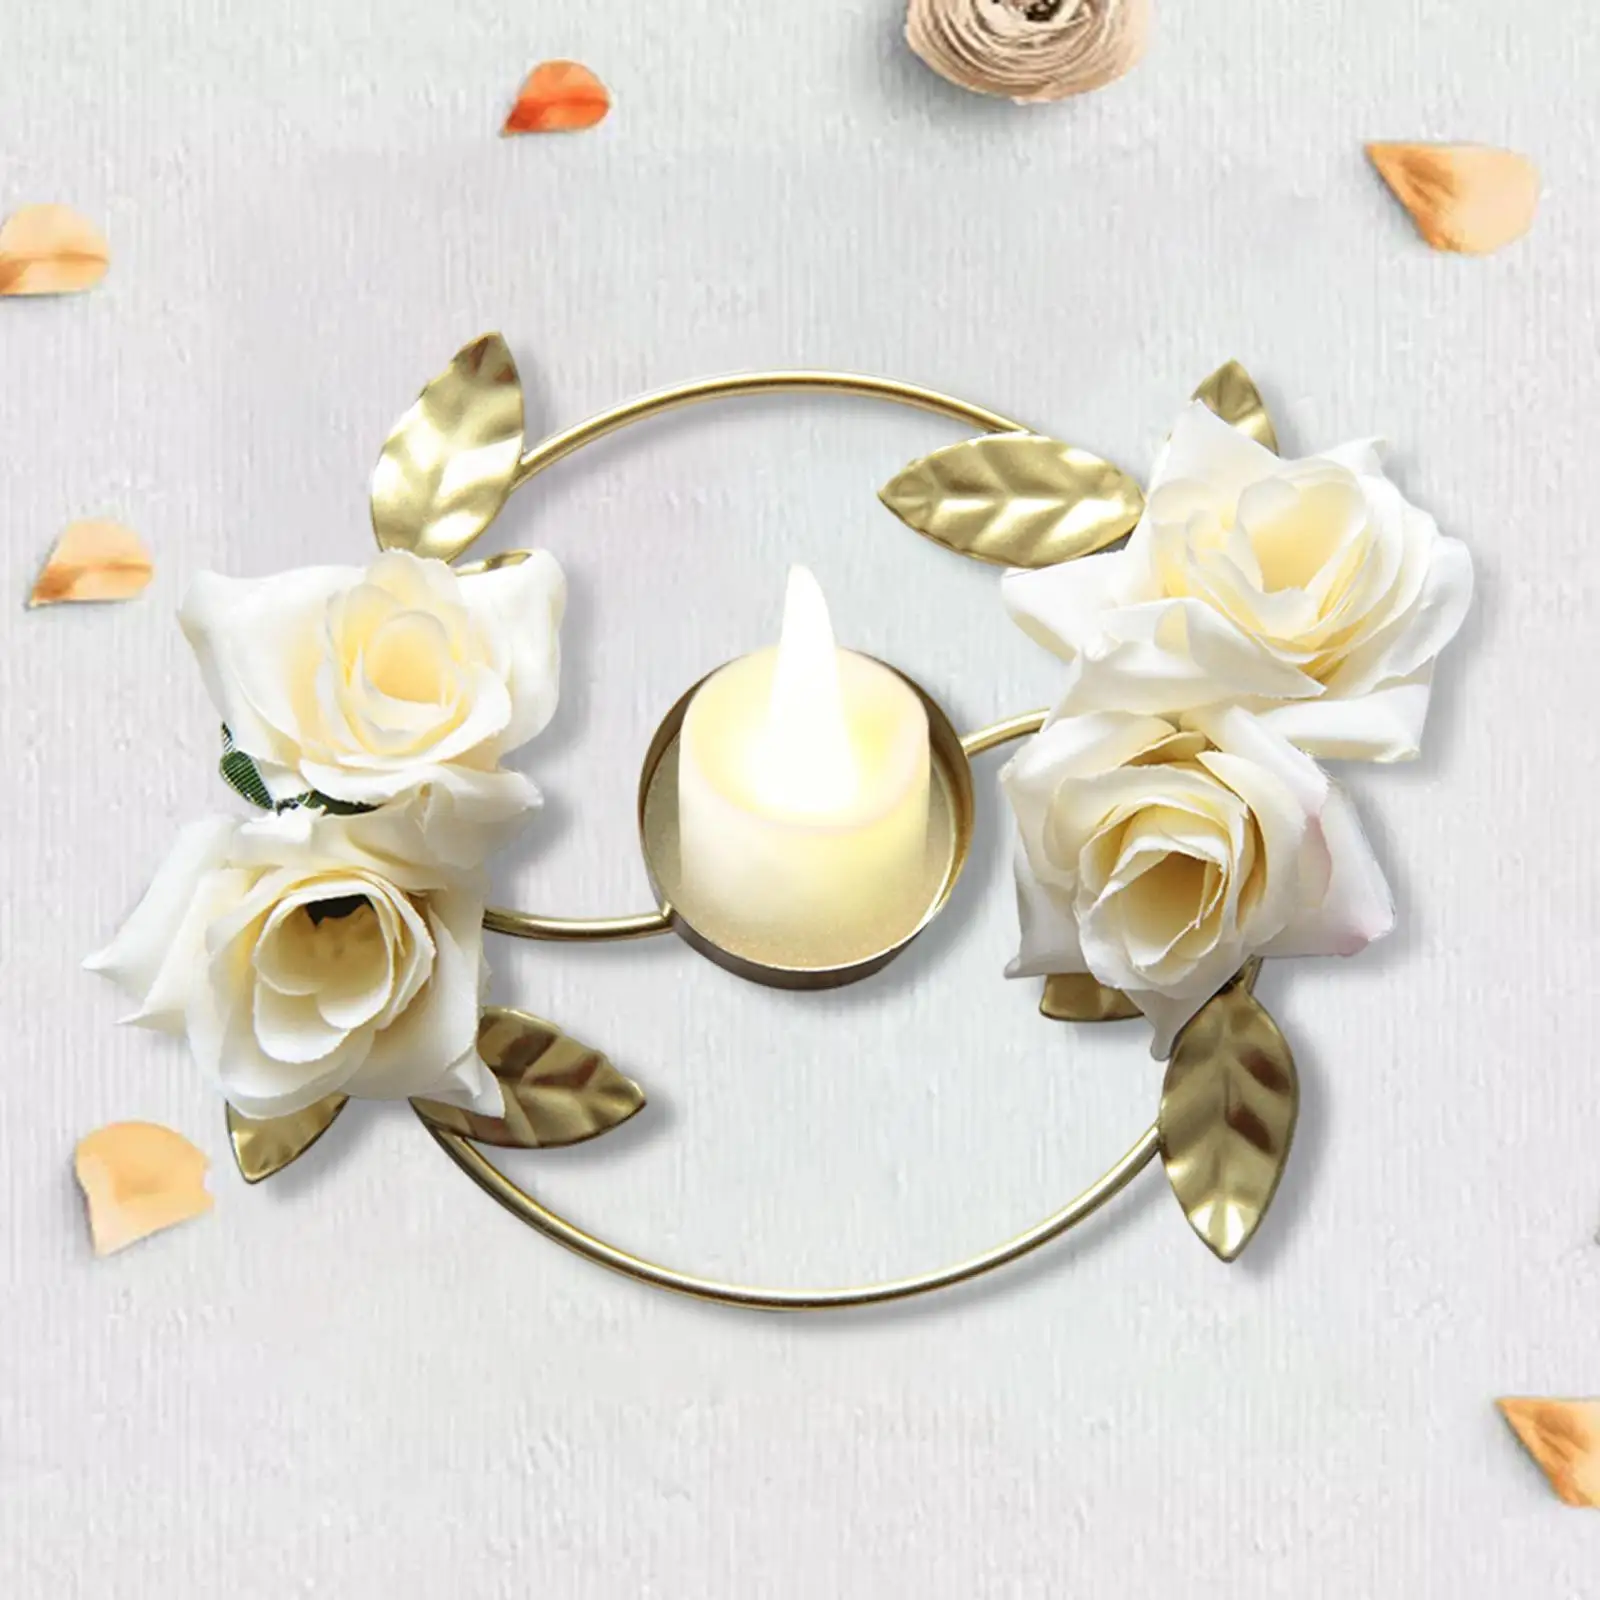 Wreaths Candle Rings Simulated Rose Rustic Pillar Candle Rings for Home Decoration Wedding Bedroom Christmas Gathering